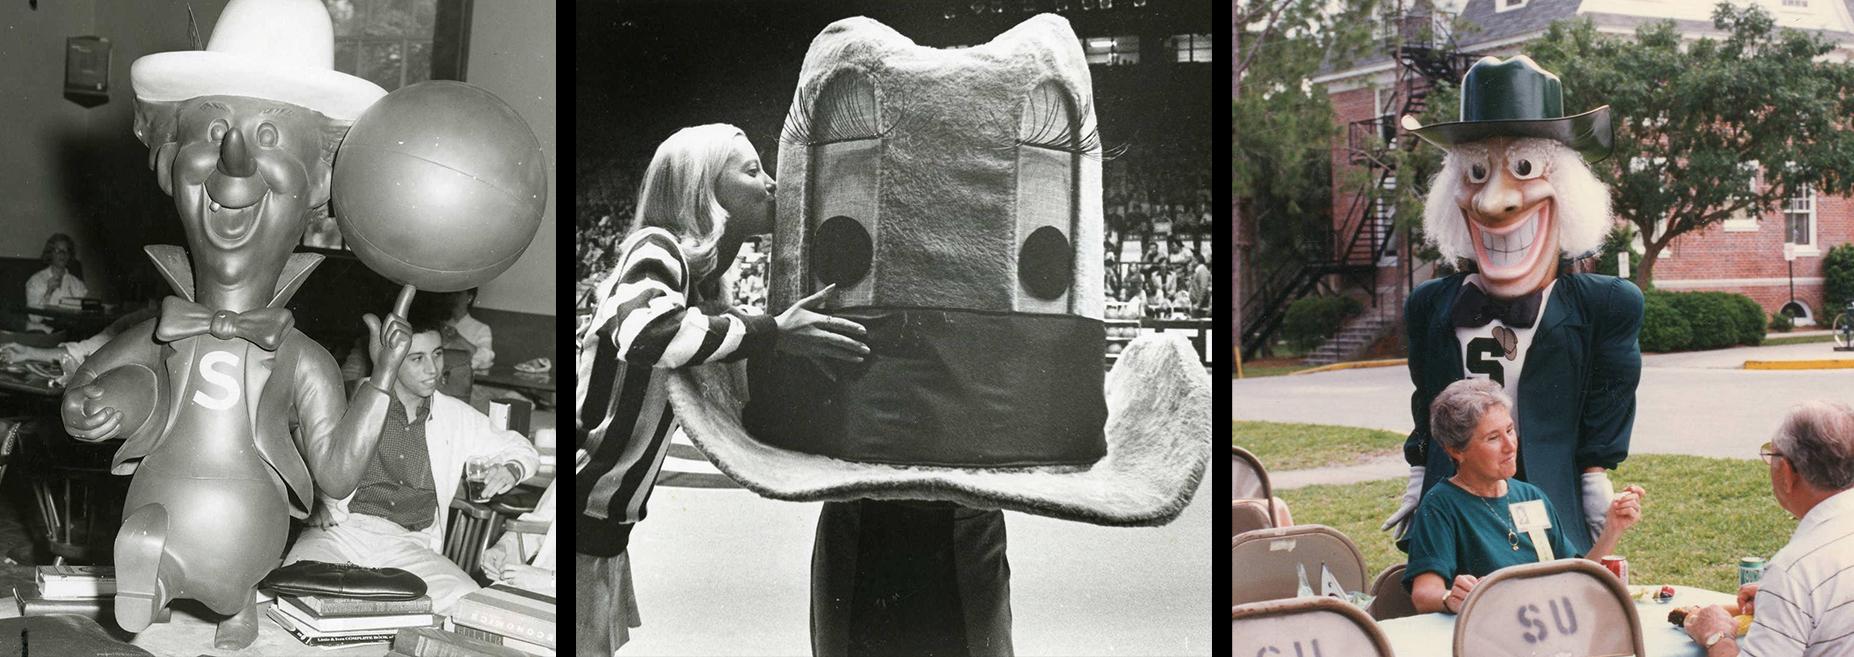 montage of three photos of previous mascots in the 1960s,1970s and 1990s